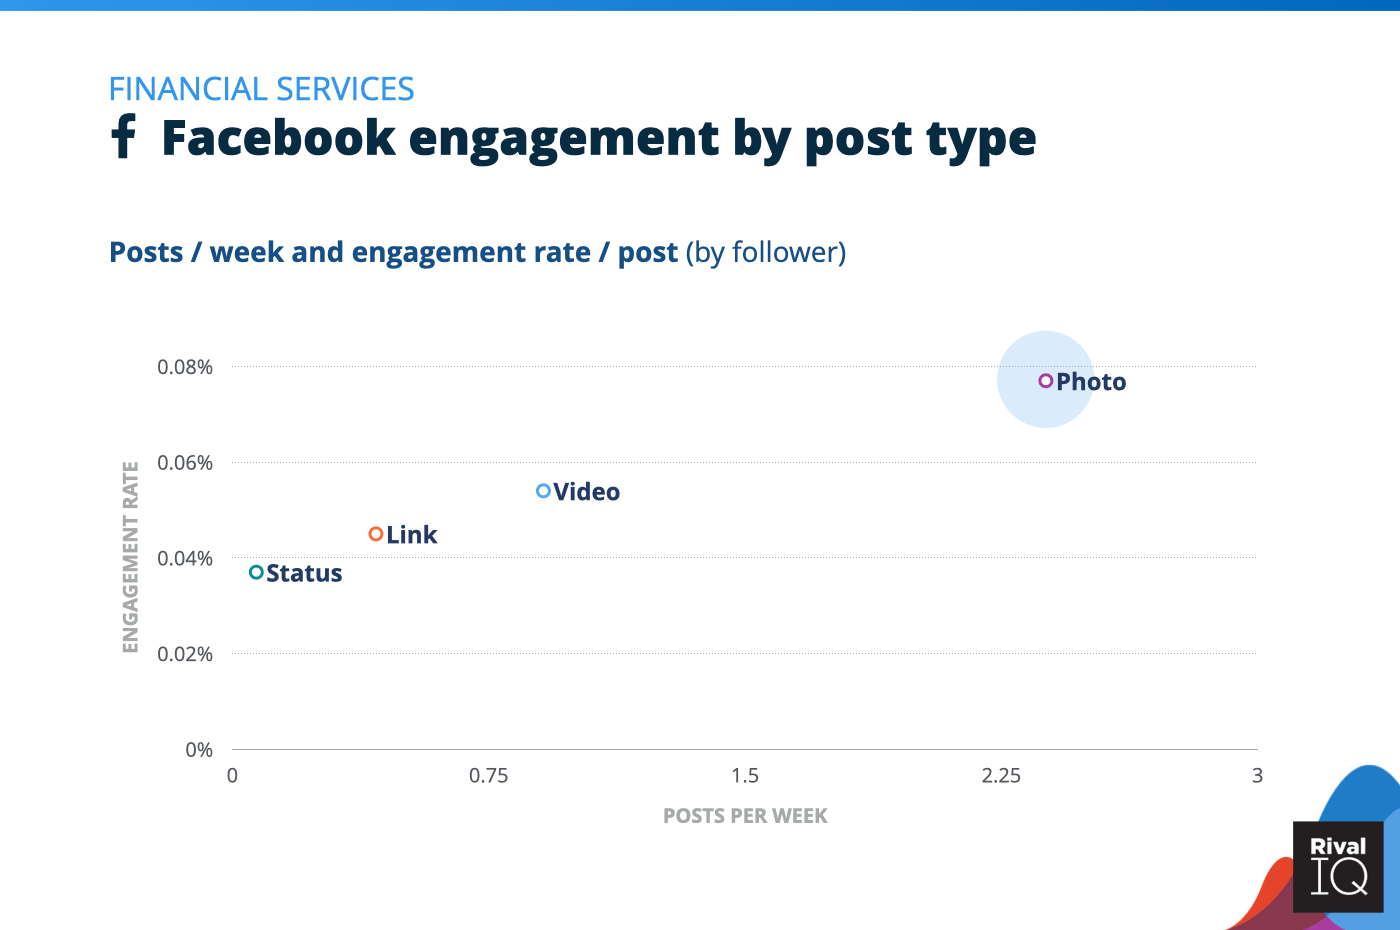 Chart of social media benchmarks for Facebook posts per week and engagement rate by post type, Financial Services